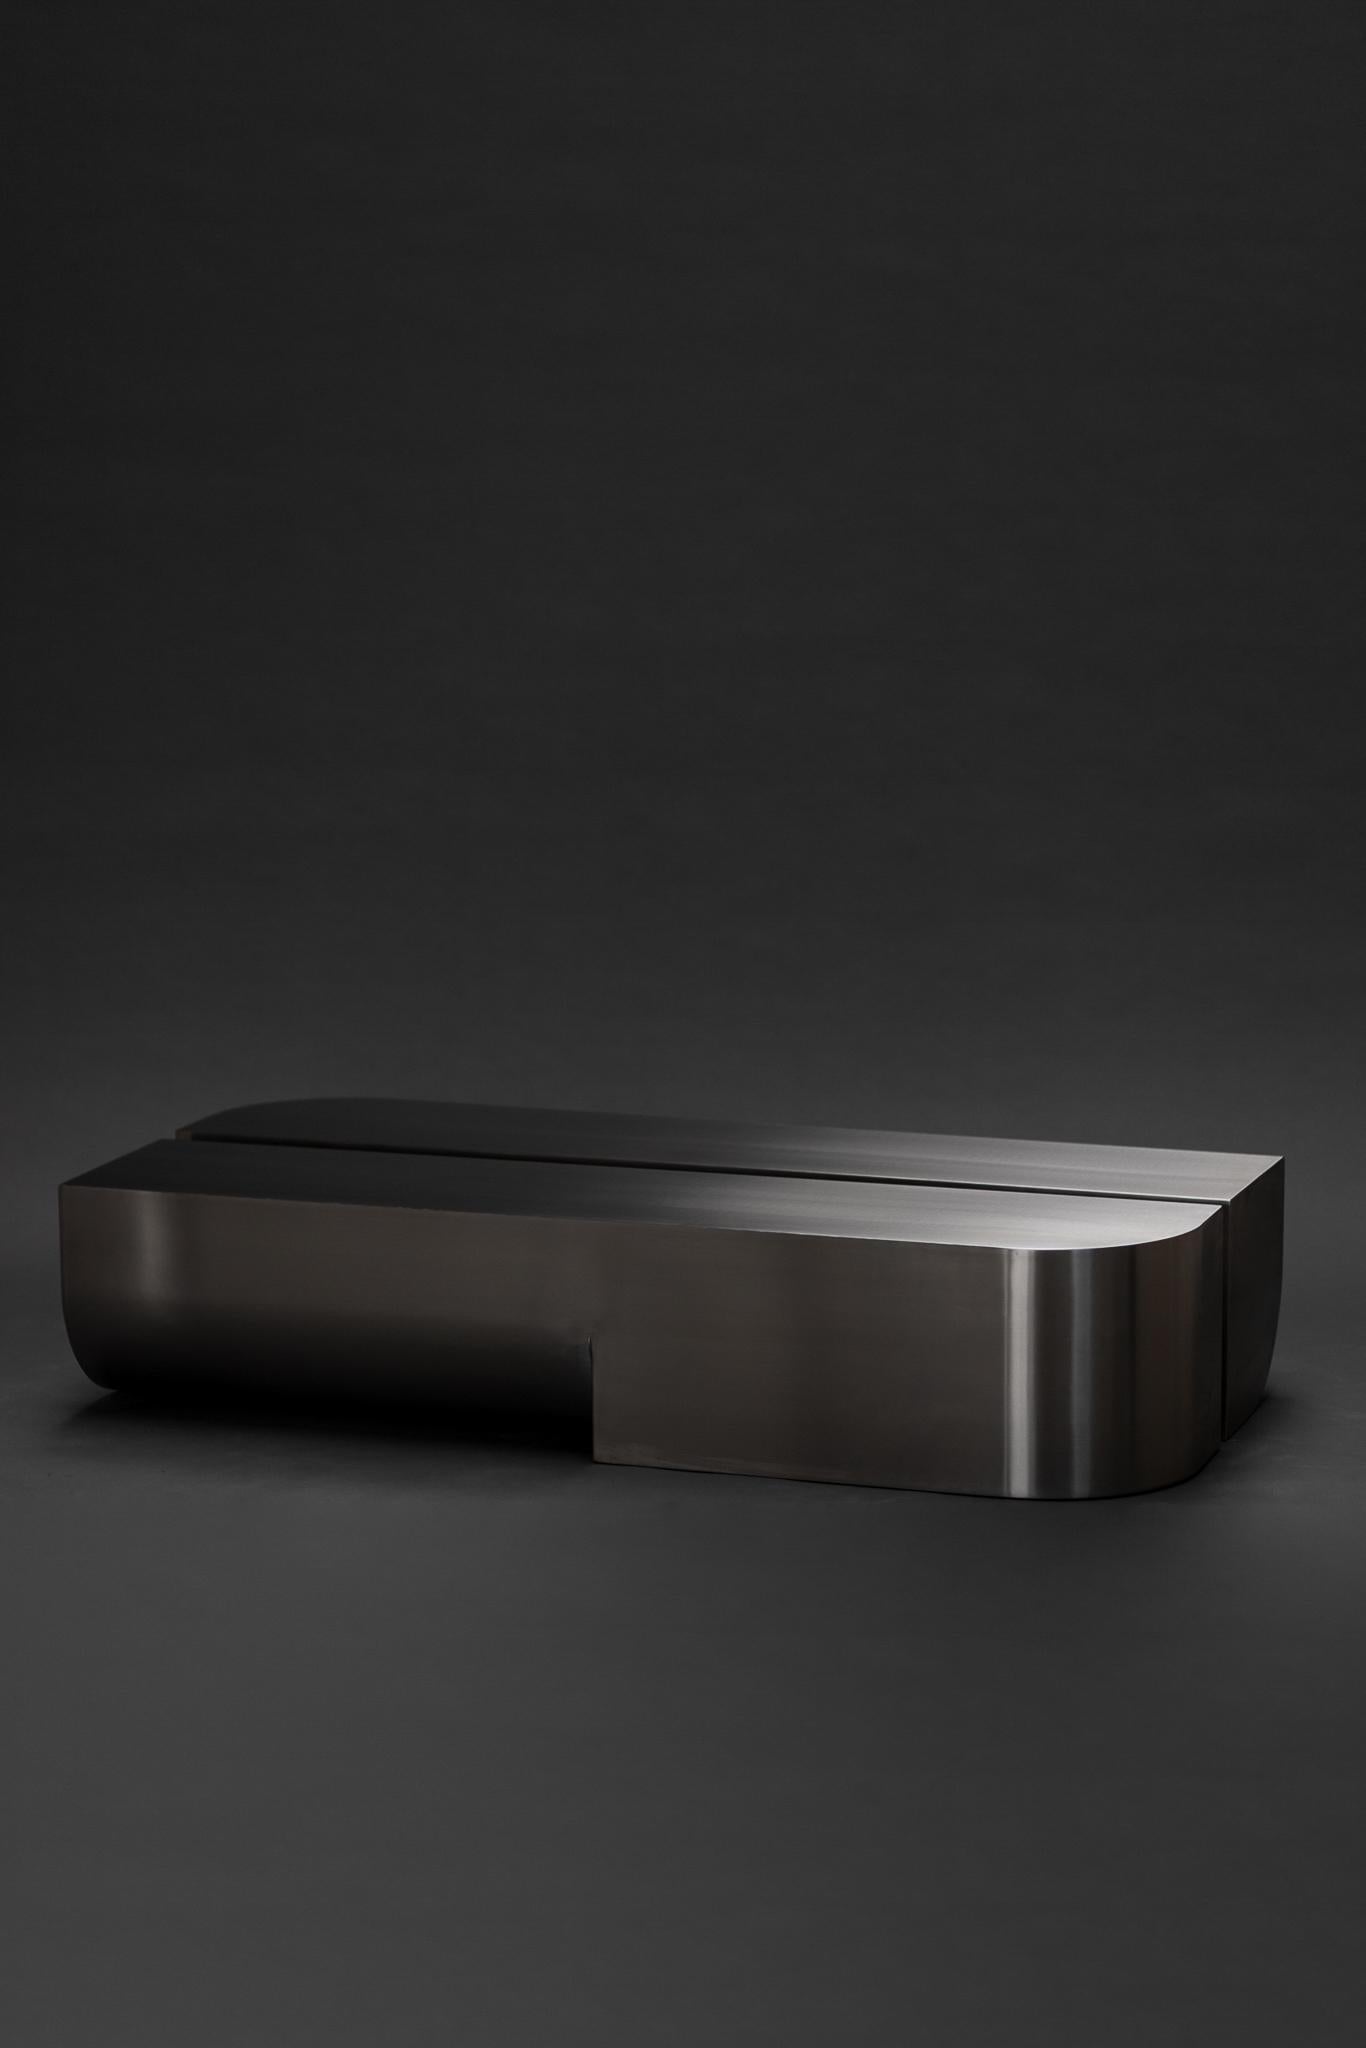 Undum Coffee Table by ​HADGE
Dimensions: D 32 x W 150 x H 32 cm.
Materials: Brushed stainless steel.
Also available in different materials.

A cohesion of simplified curved shapes in different directions reflects the passage of passing by and